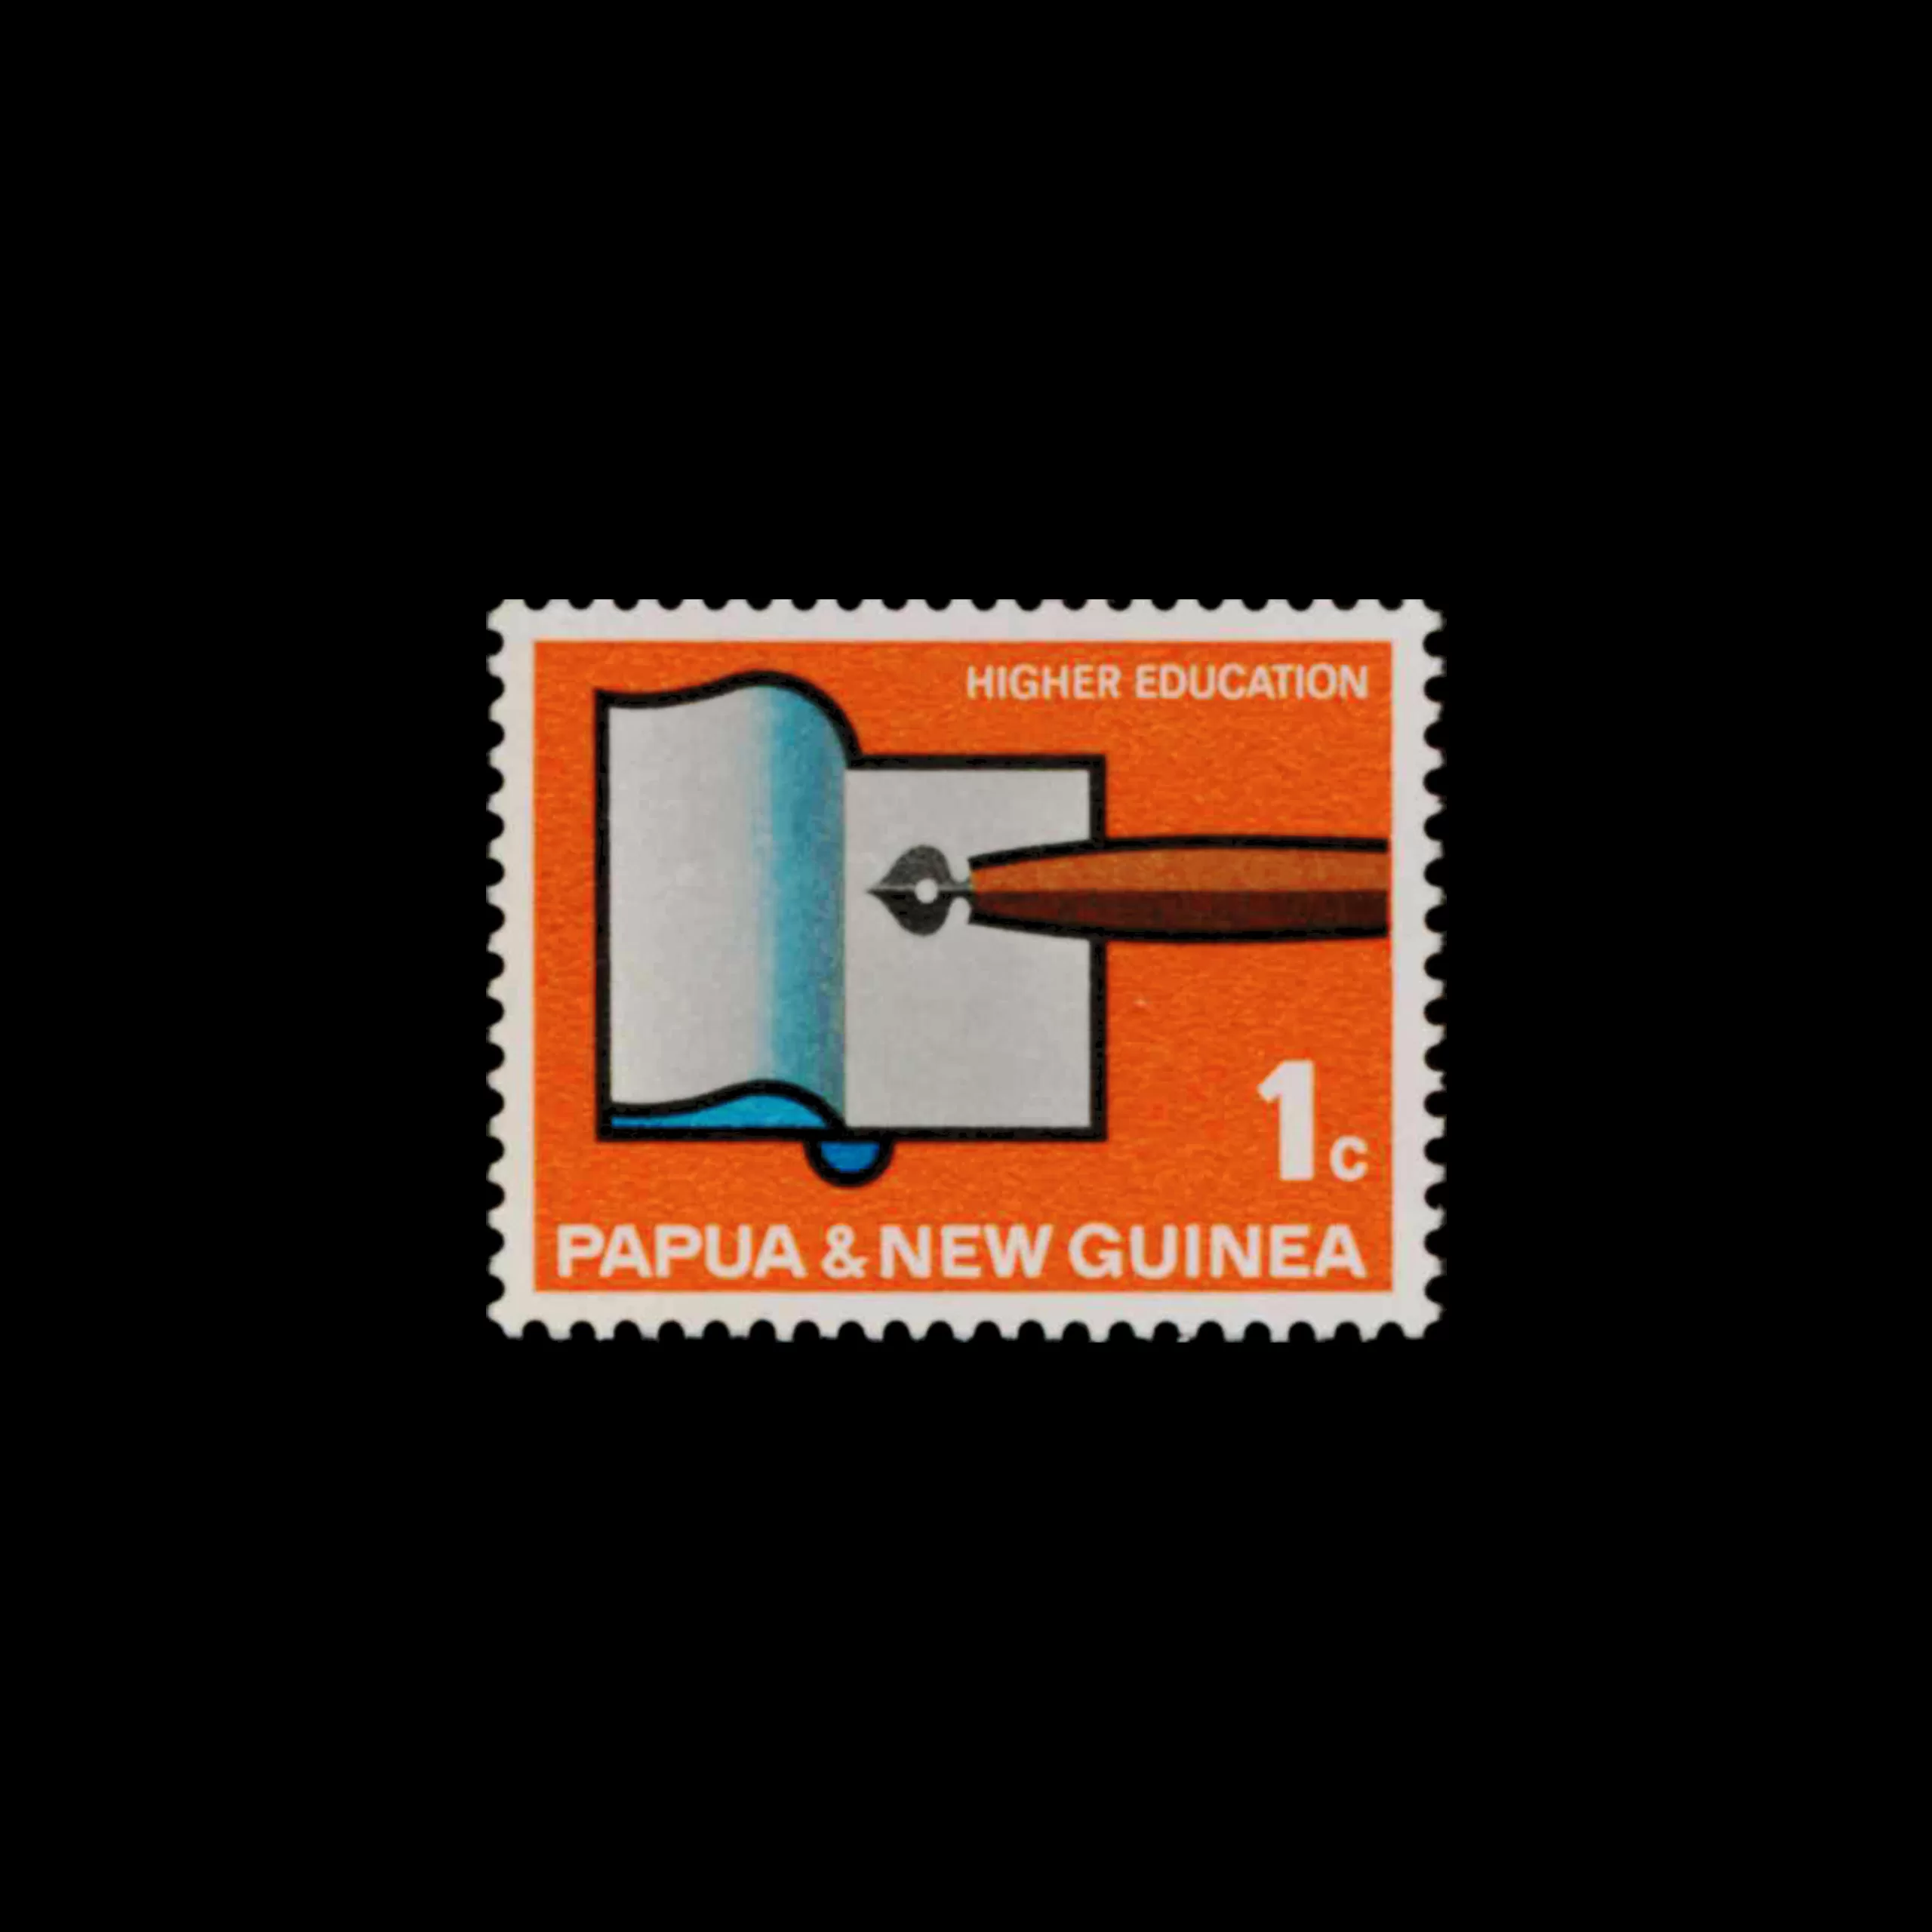 Higher Education, Papua New Guinea Stamps, 1967. Designed by George Hamori